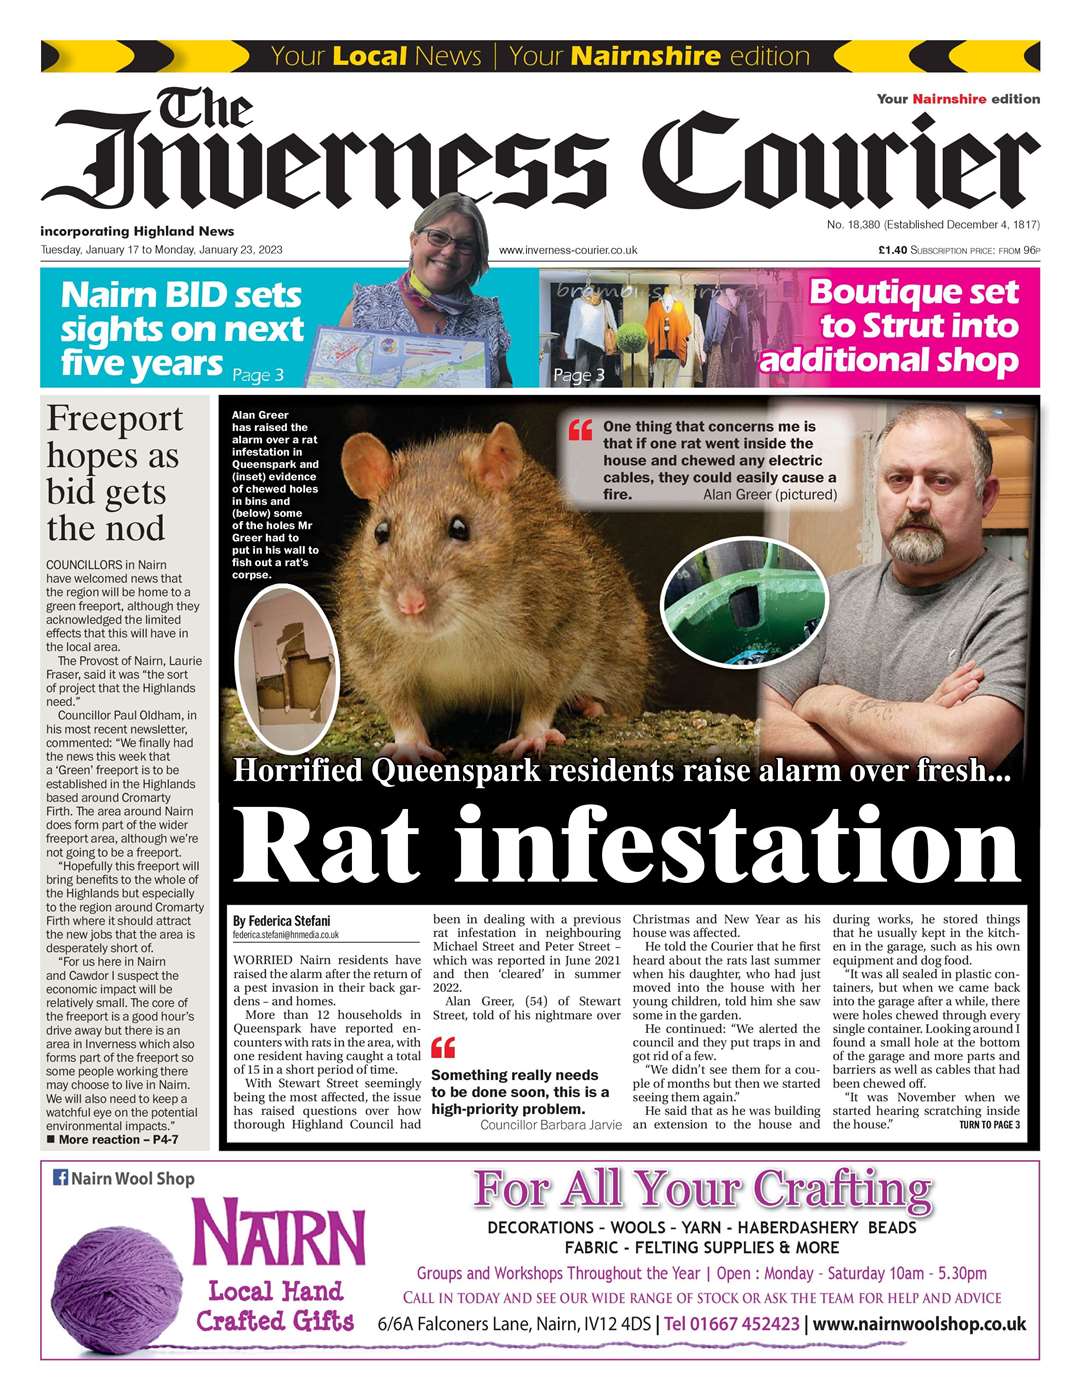 The Inverness Courier (Nairnshire edition), January 17, front page.